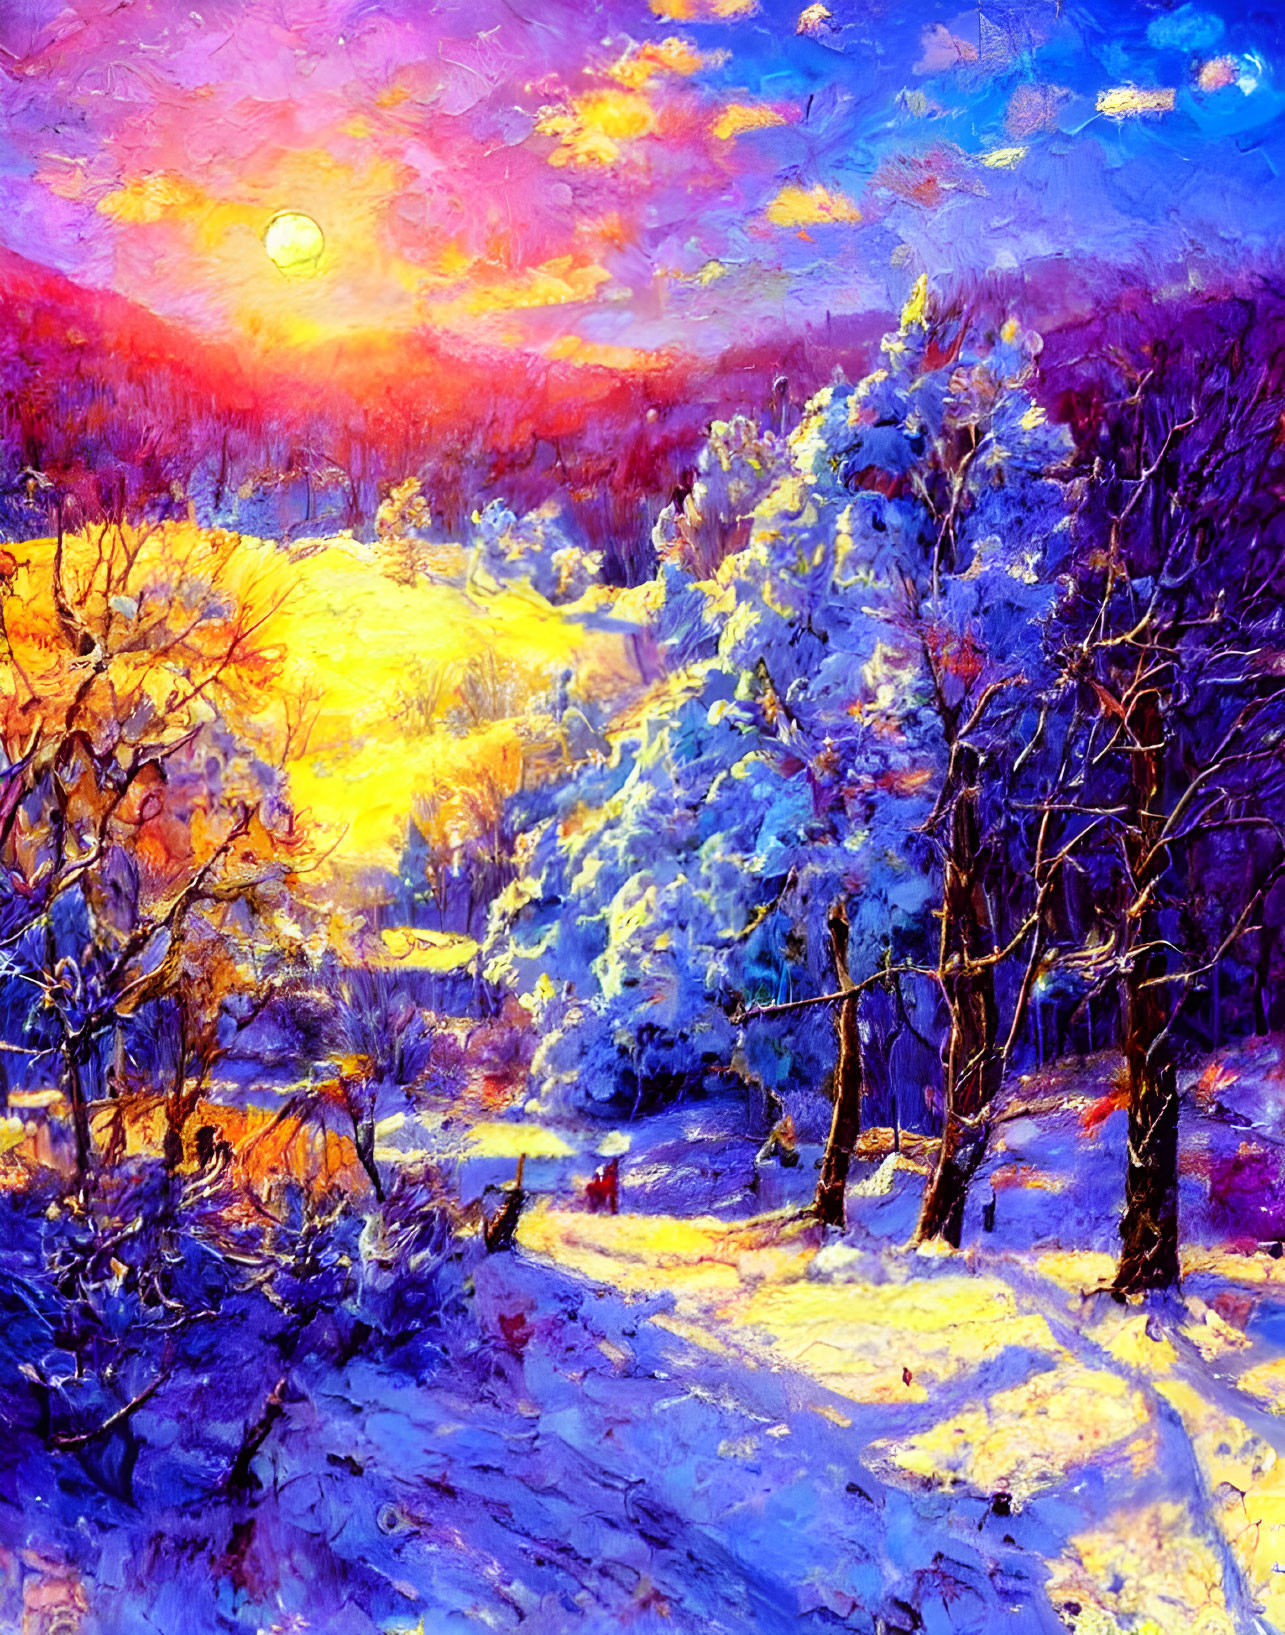 Snowy landscape painting with colorful sunset sky.